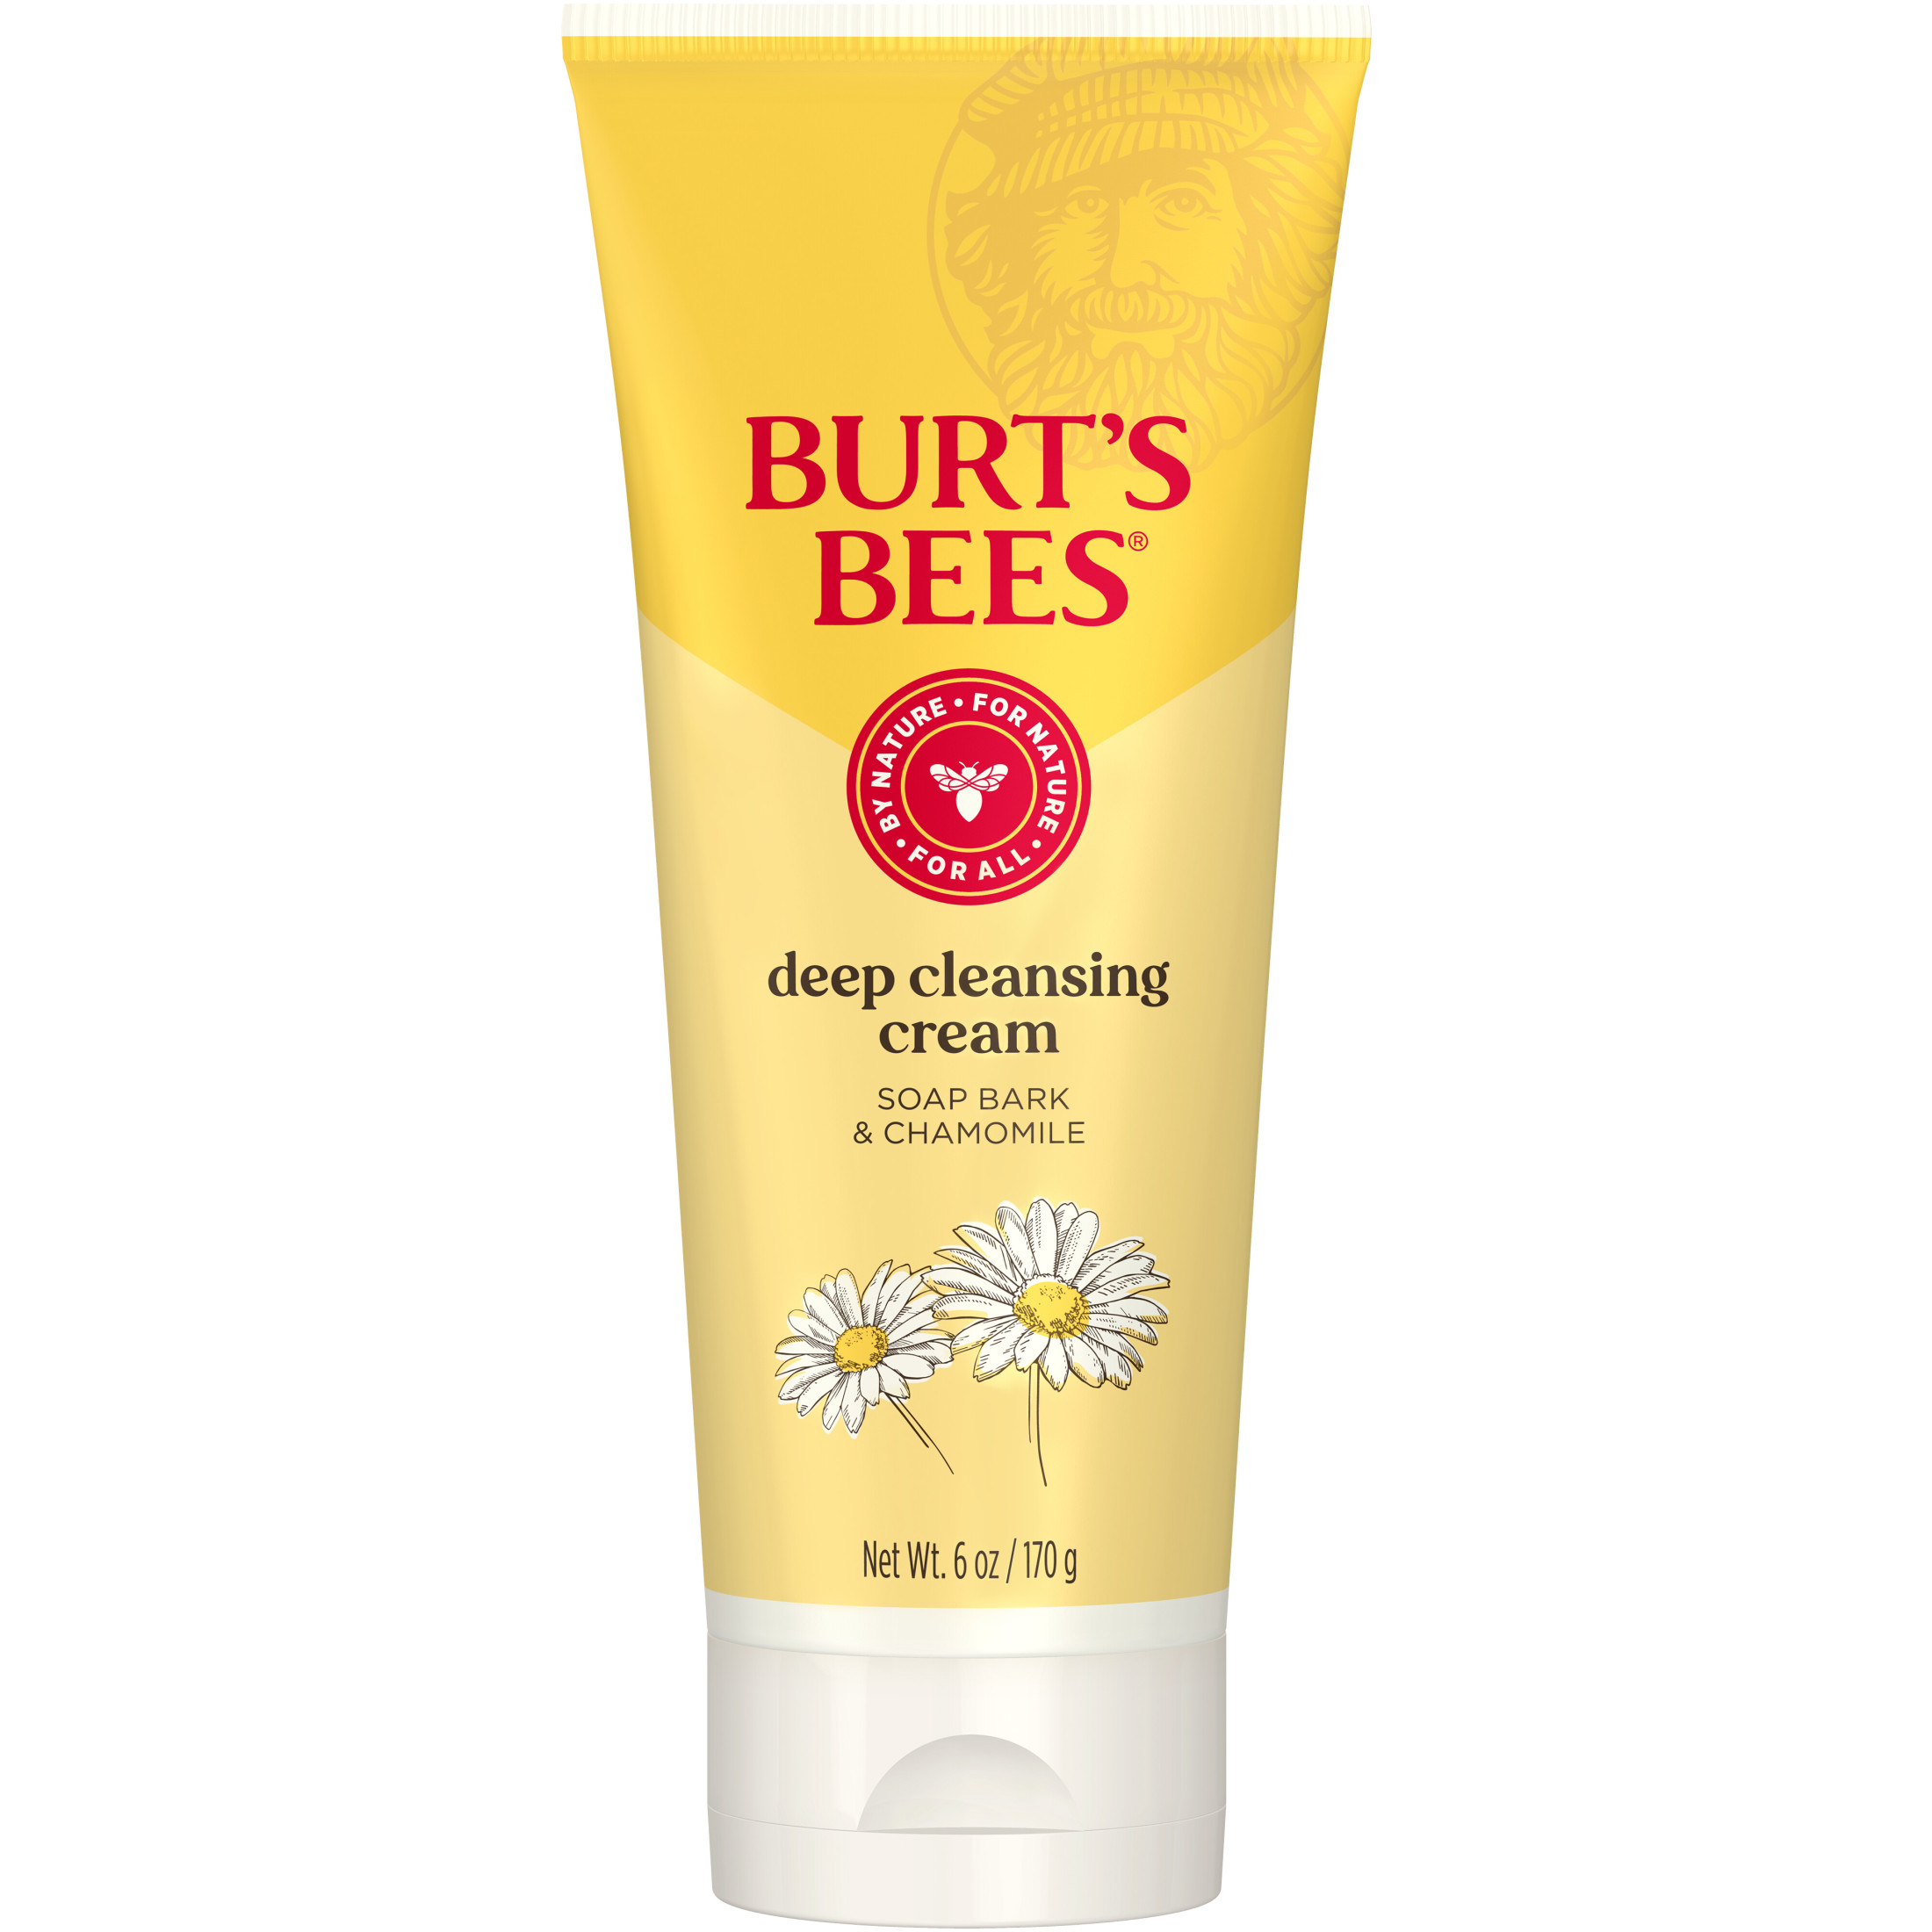 Burt's Bees Deep Cleansing Cream with Soap Bark and Chamomile, 6 Ounces - image 1 of 15